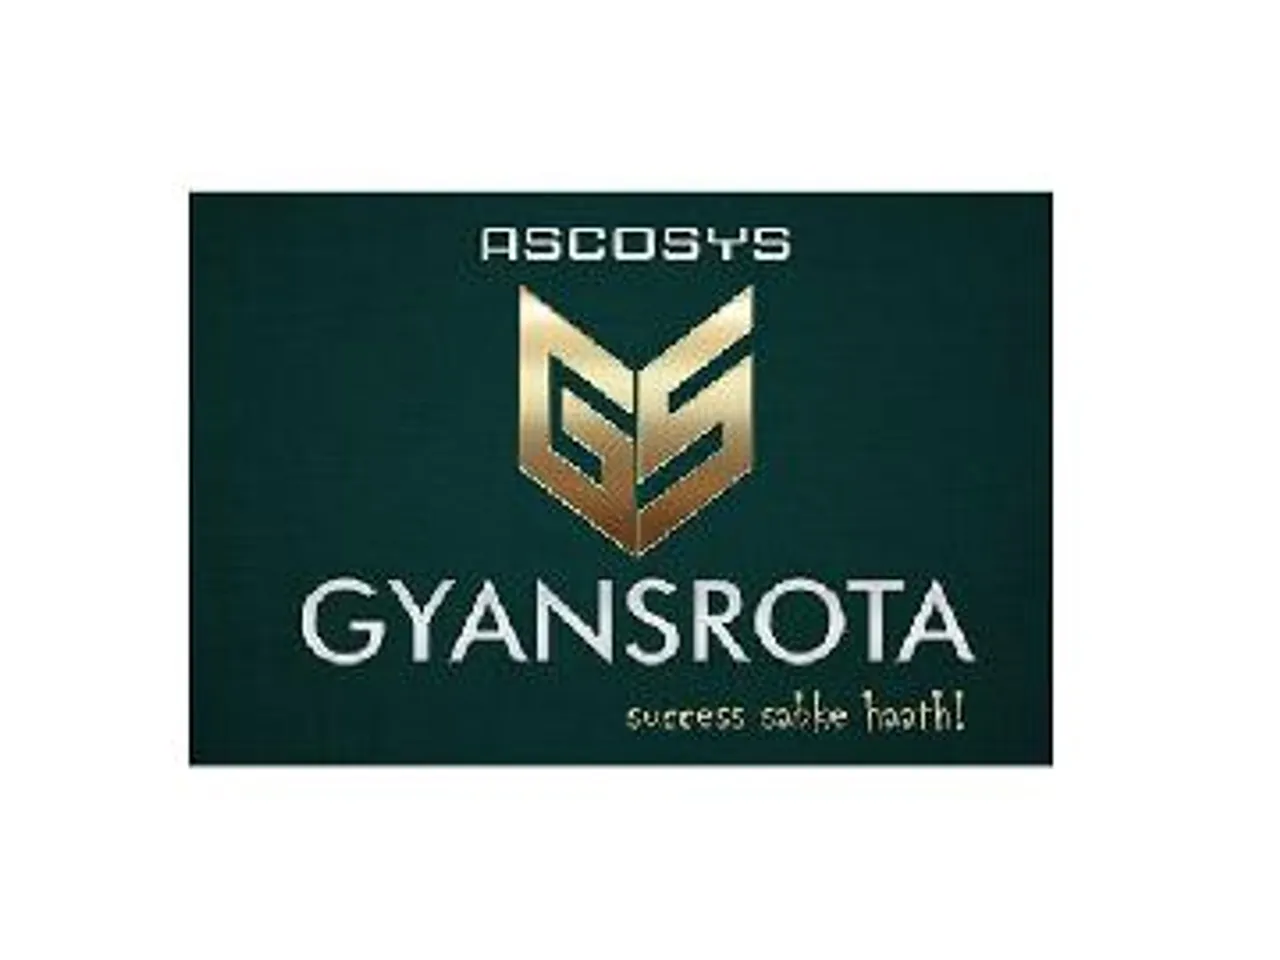 GYANSROTA Completes 1st Year Successfully